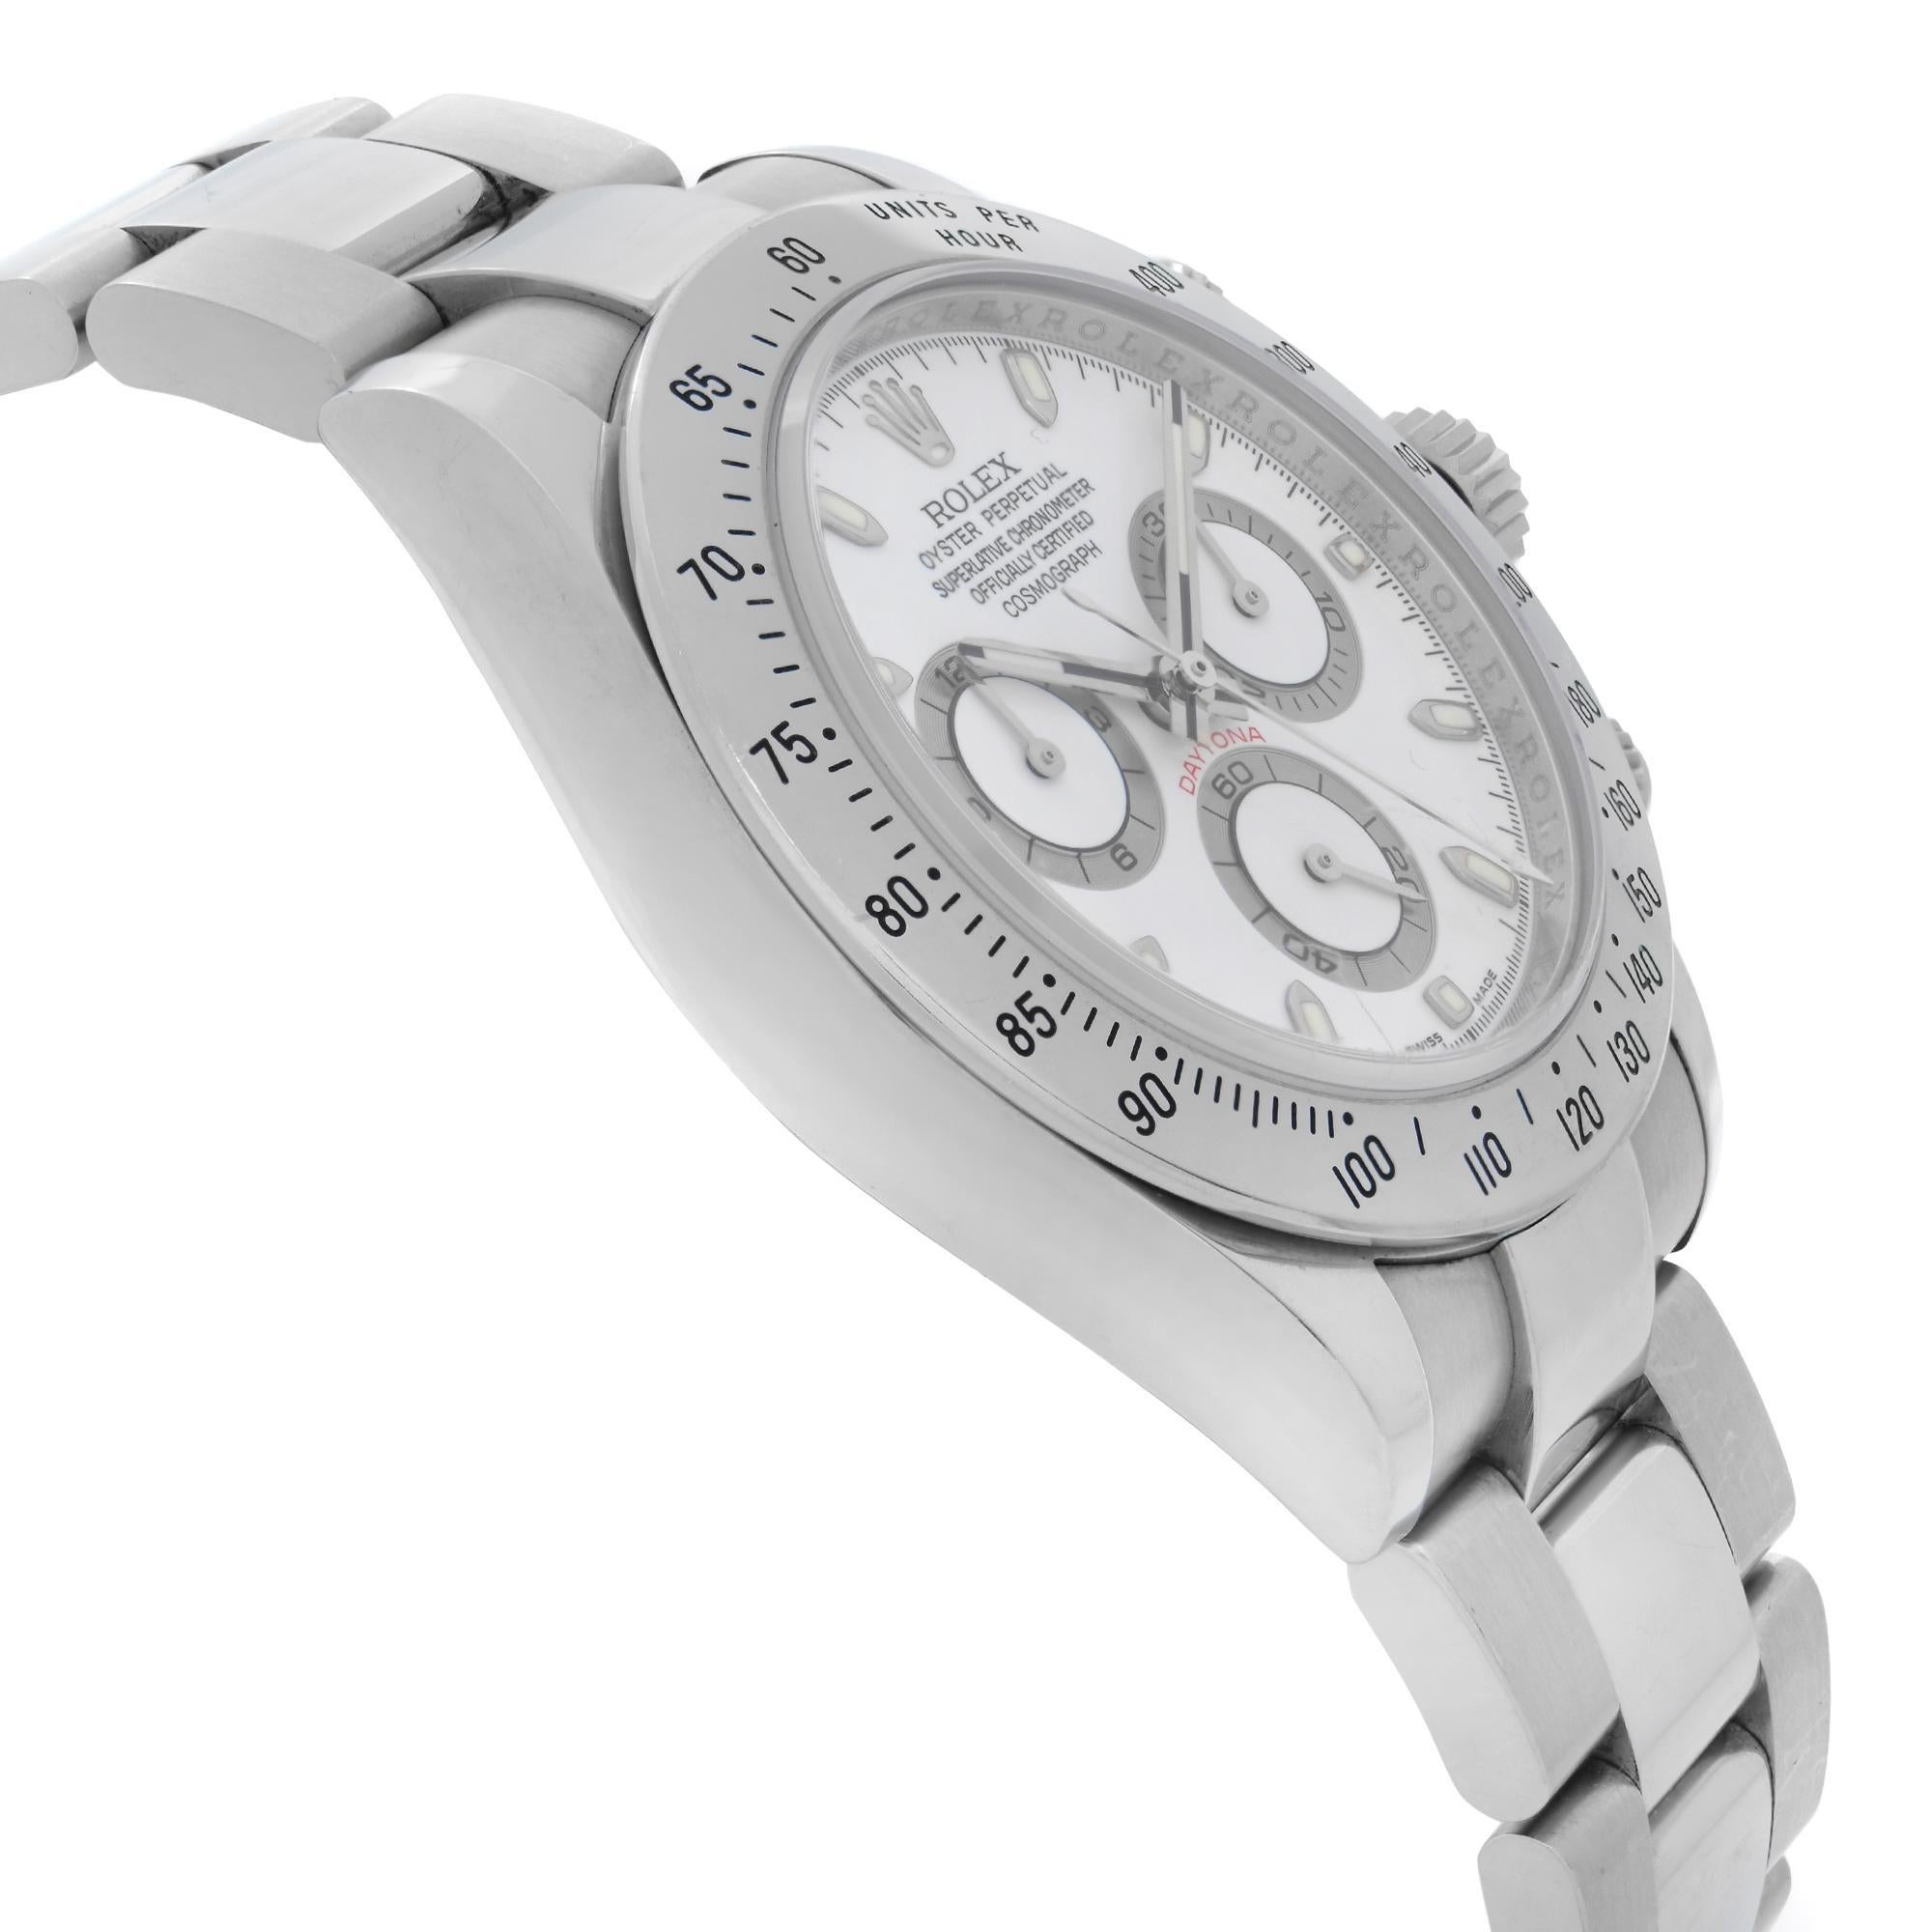 rolex daytona oyster perpetual superlative chronometer officially certified cosmograph